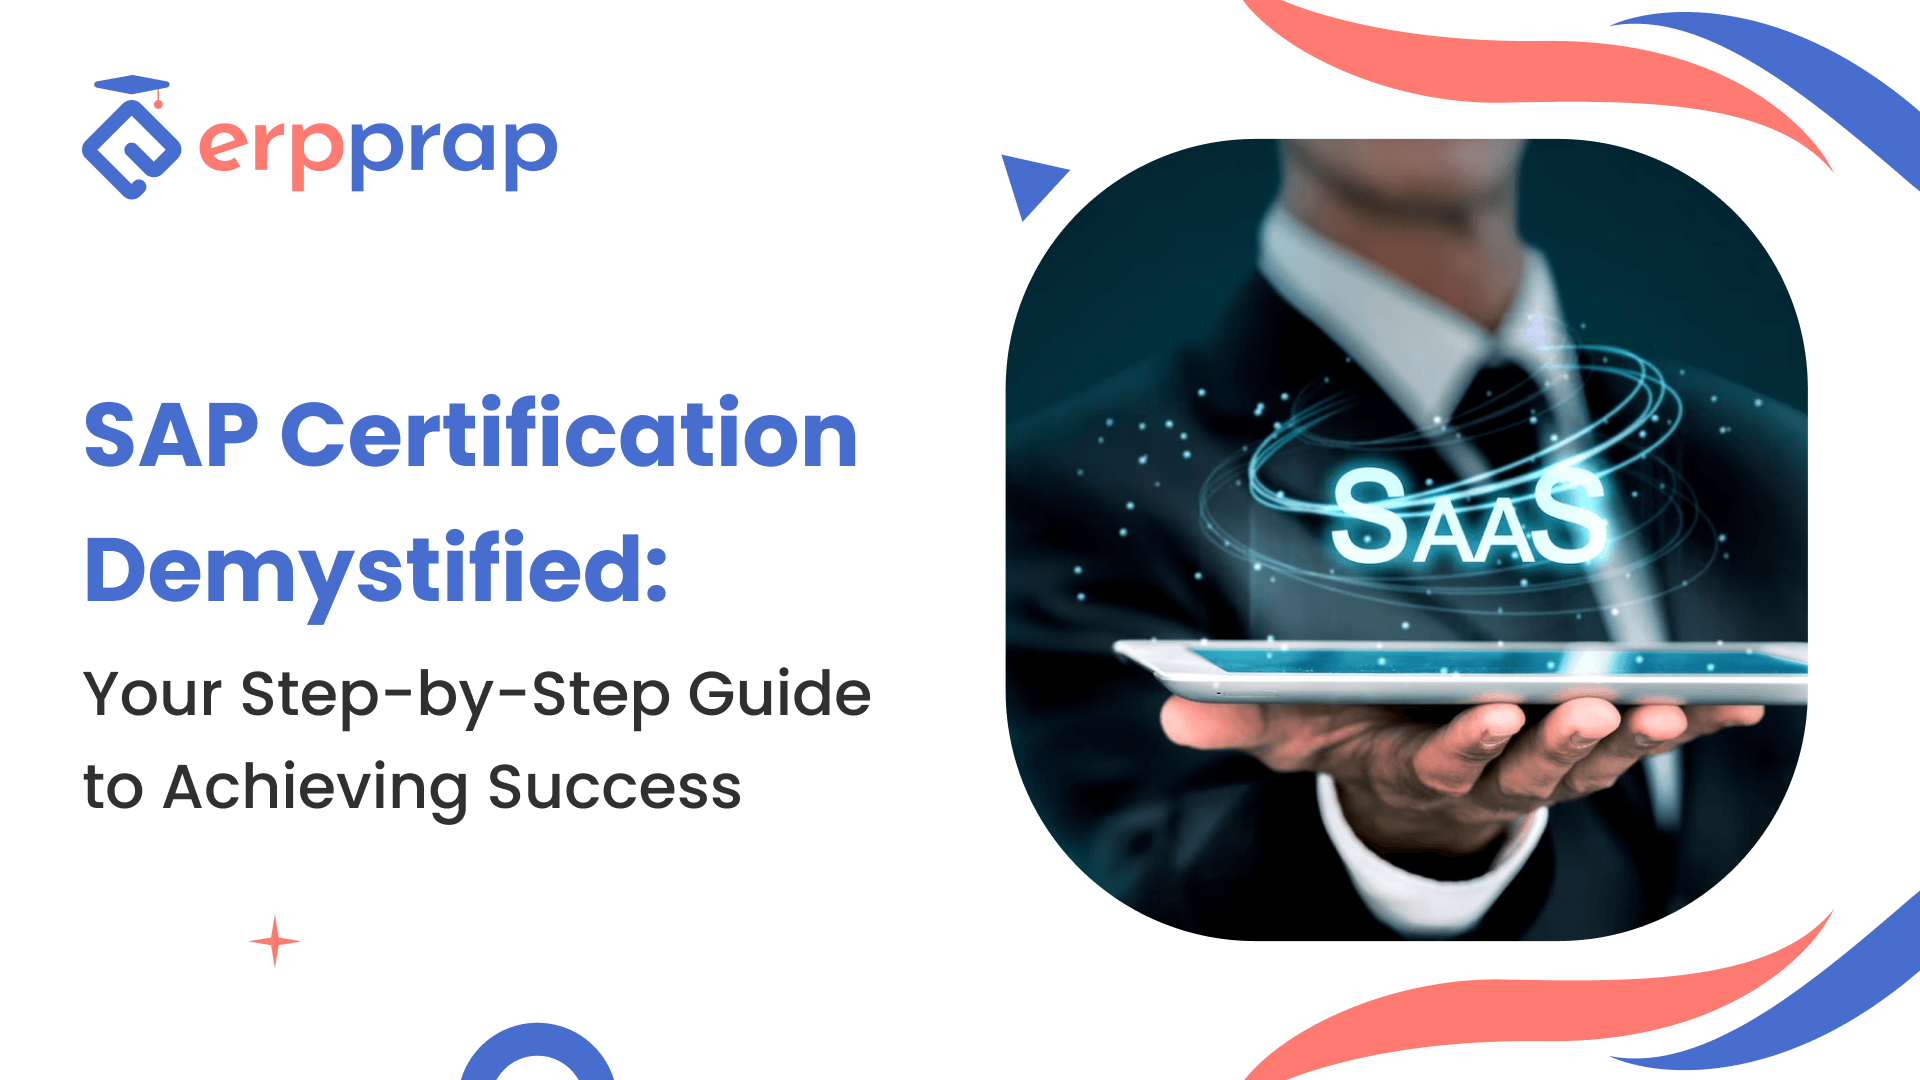 SAP Certification Demystified: Your Step-by-Step Guide to Achieving Success